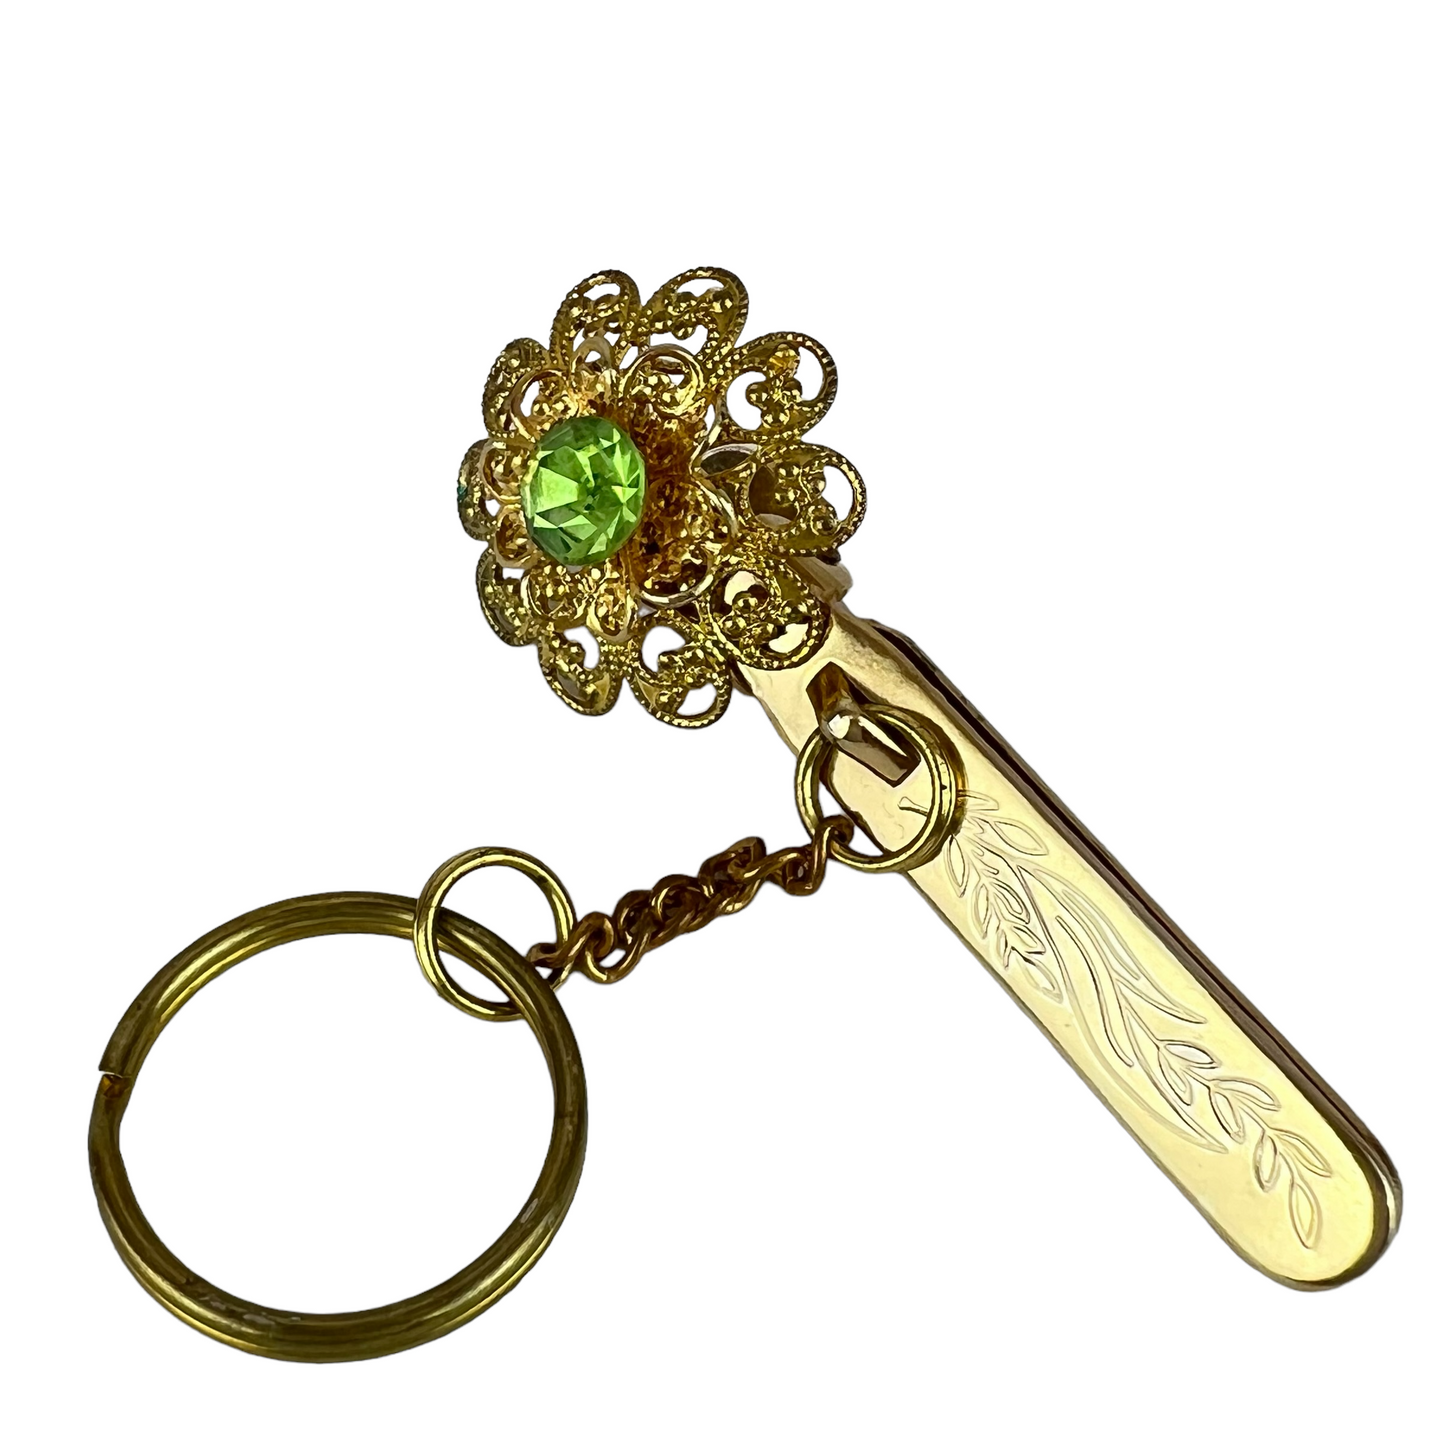 Vintage Gold Filigree Key Finder Keychain.   Good vintage condition.   Processed within 1 business day (not included in shipping carrier’s estimated arrival time). Tracking uploaded immediately upon shipment.